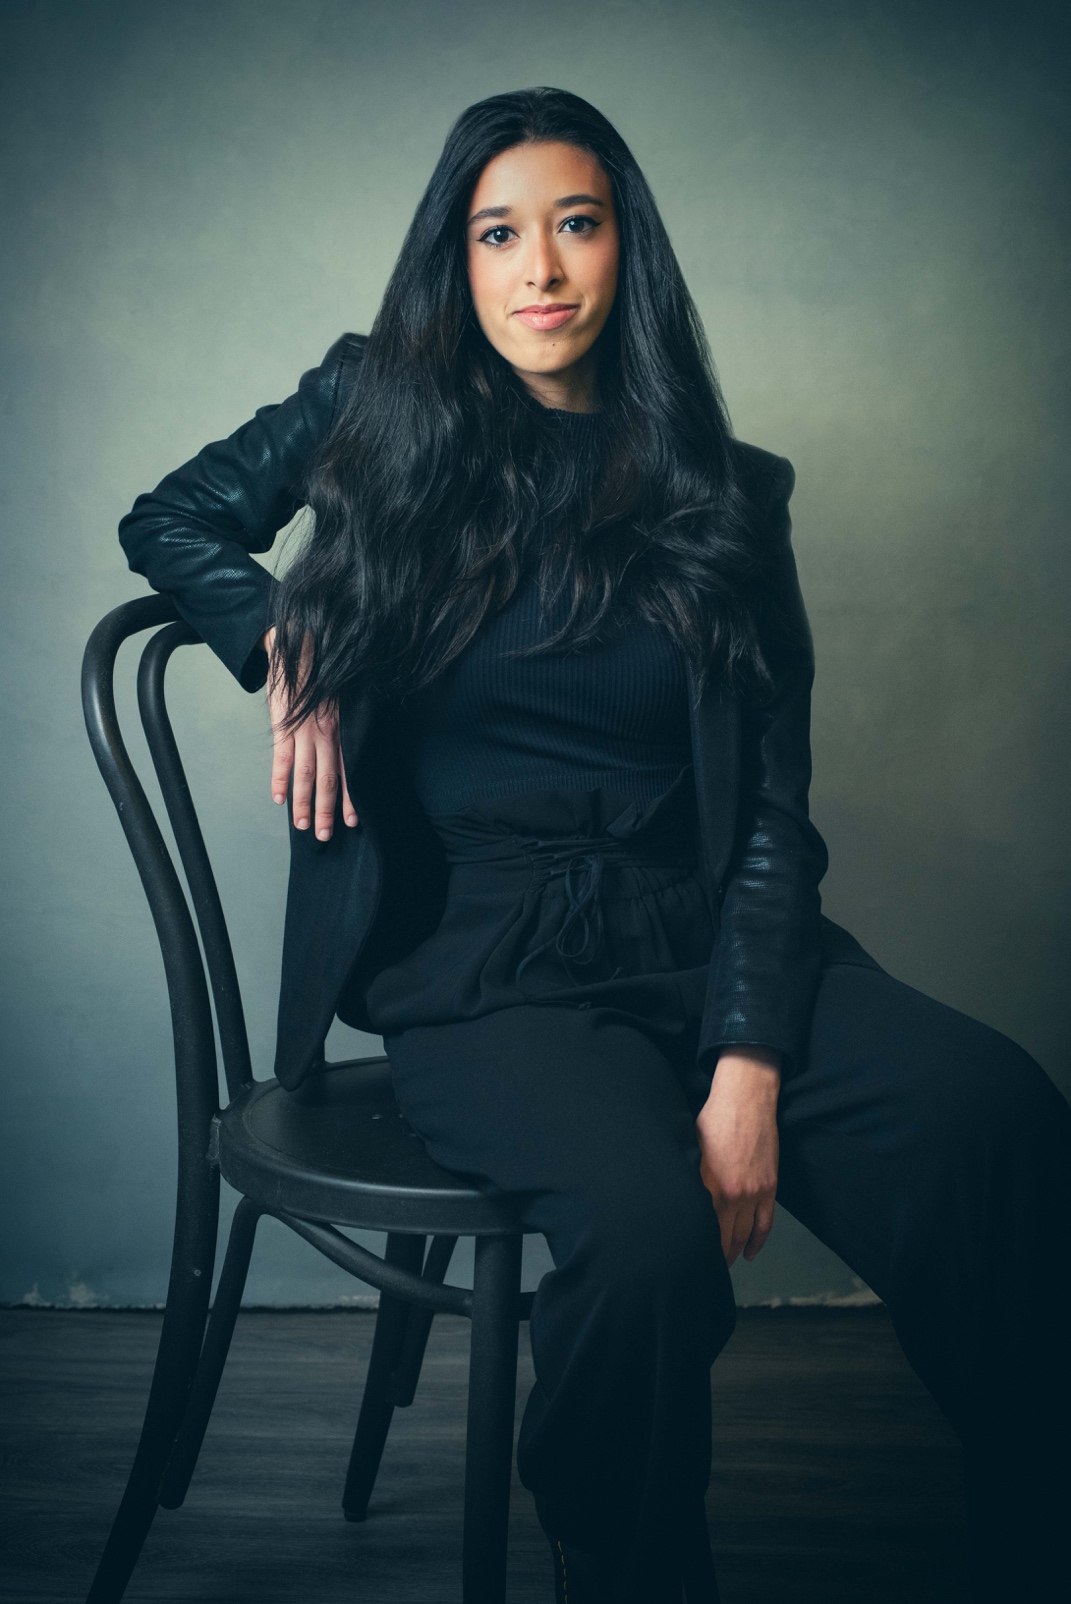 A woman with a medium-dark skin with long dark hair, wearing a black long-sleeve shirt and black pants seated in a black chair, one arm is resting on the back of the chair and the other is draped into her lap, in a gray room with a grayish wood floor.